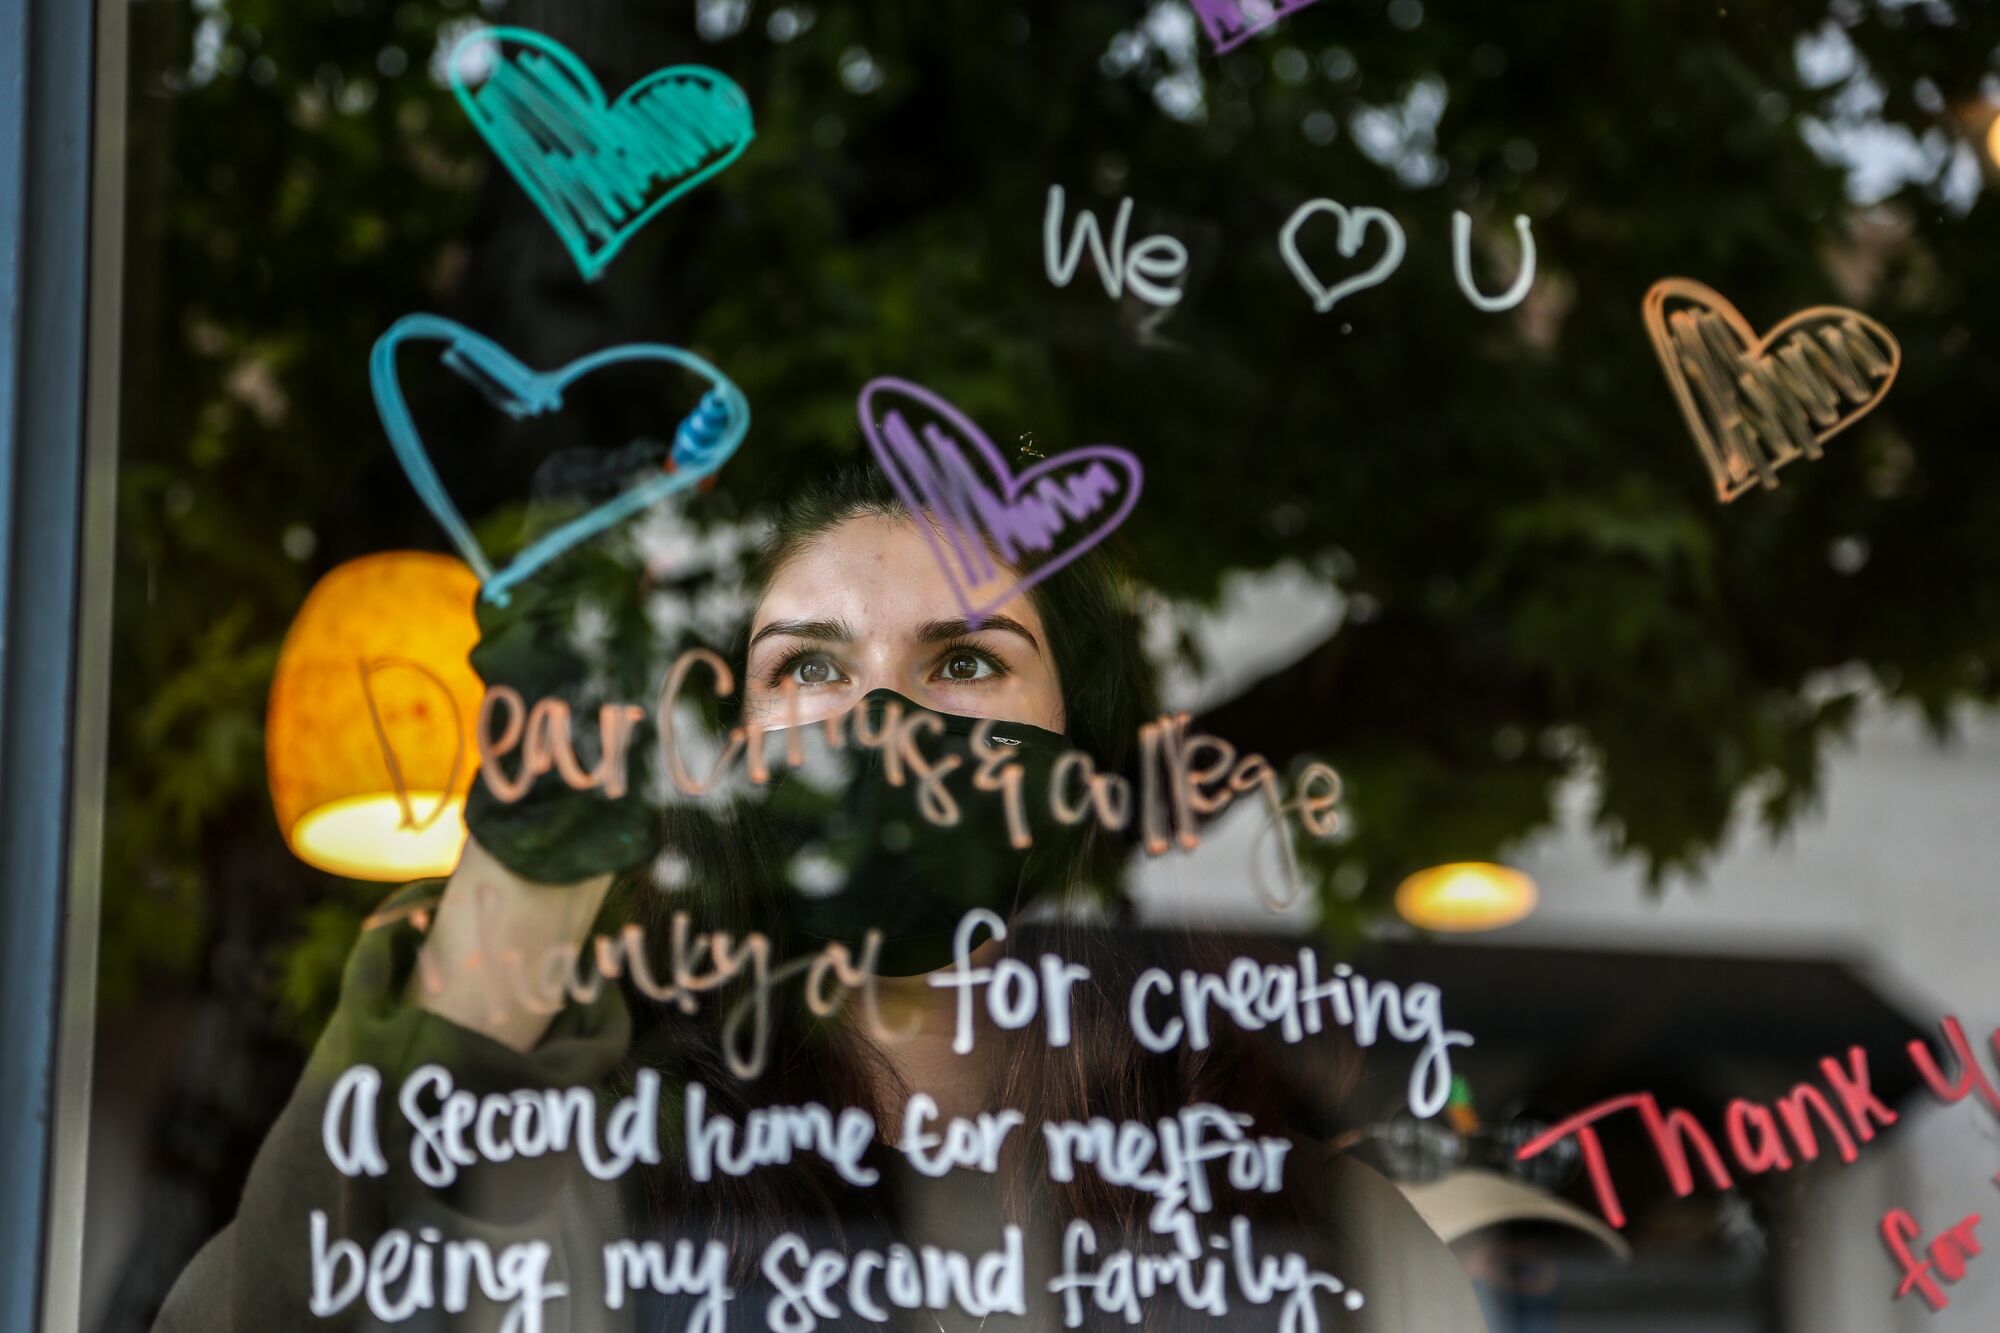 A Starbucks employee in Covina writes inspiring messages on the store window during the COVID-19 pandemic.